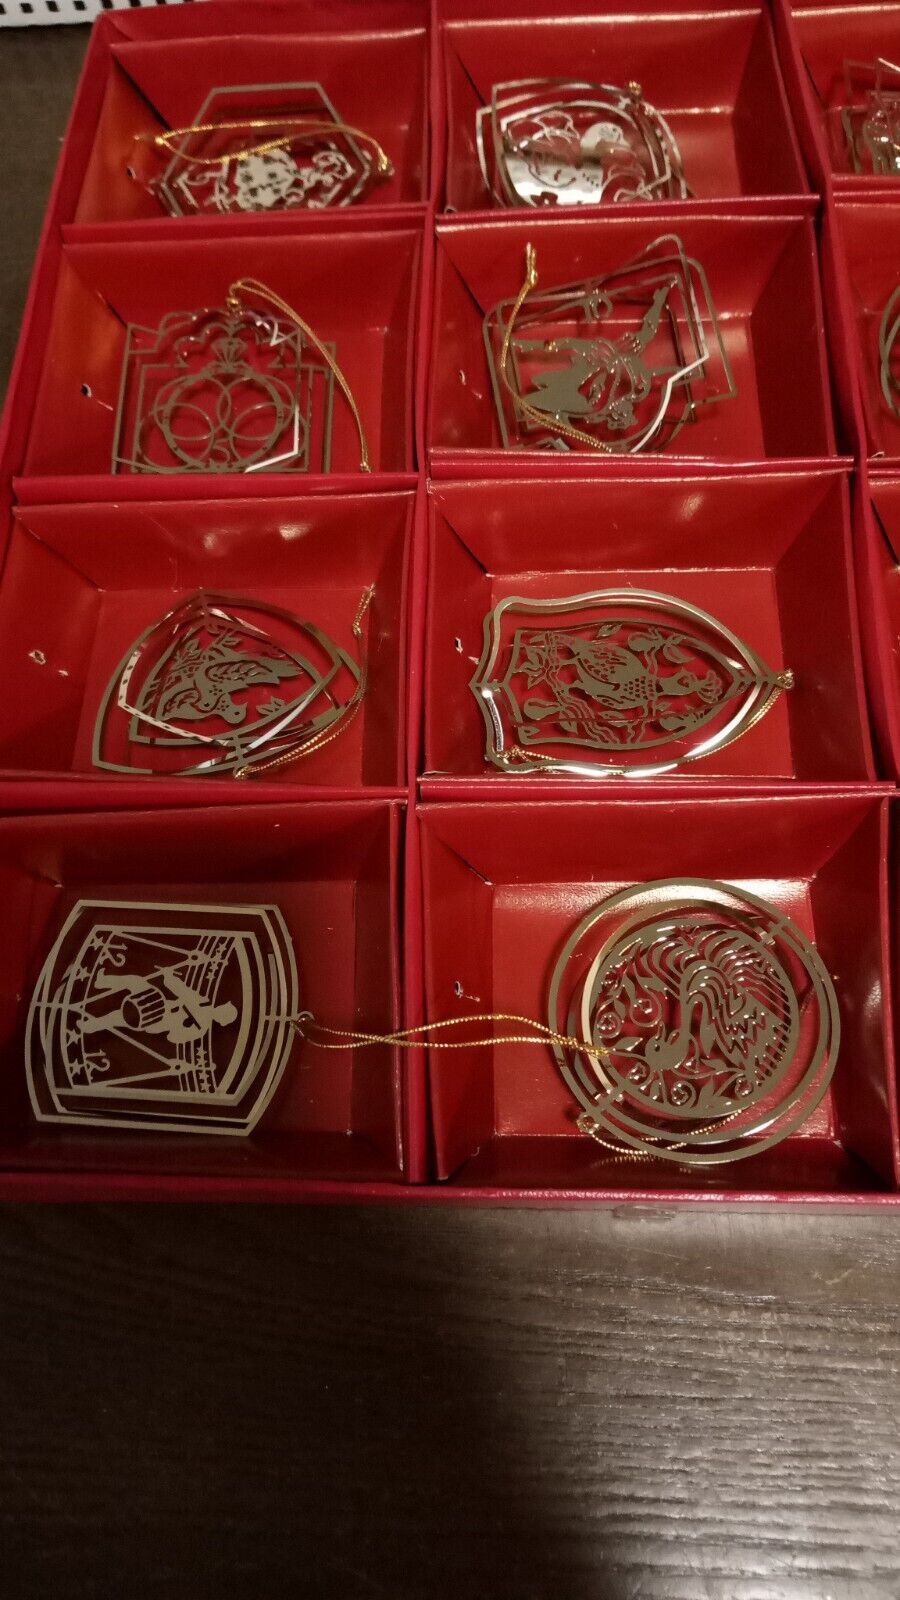 12 Days Of Christmas Ornaments. Silver Plated / Silver Tone. Great Condition.